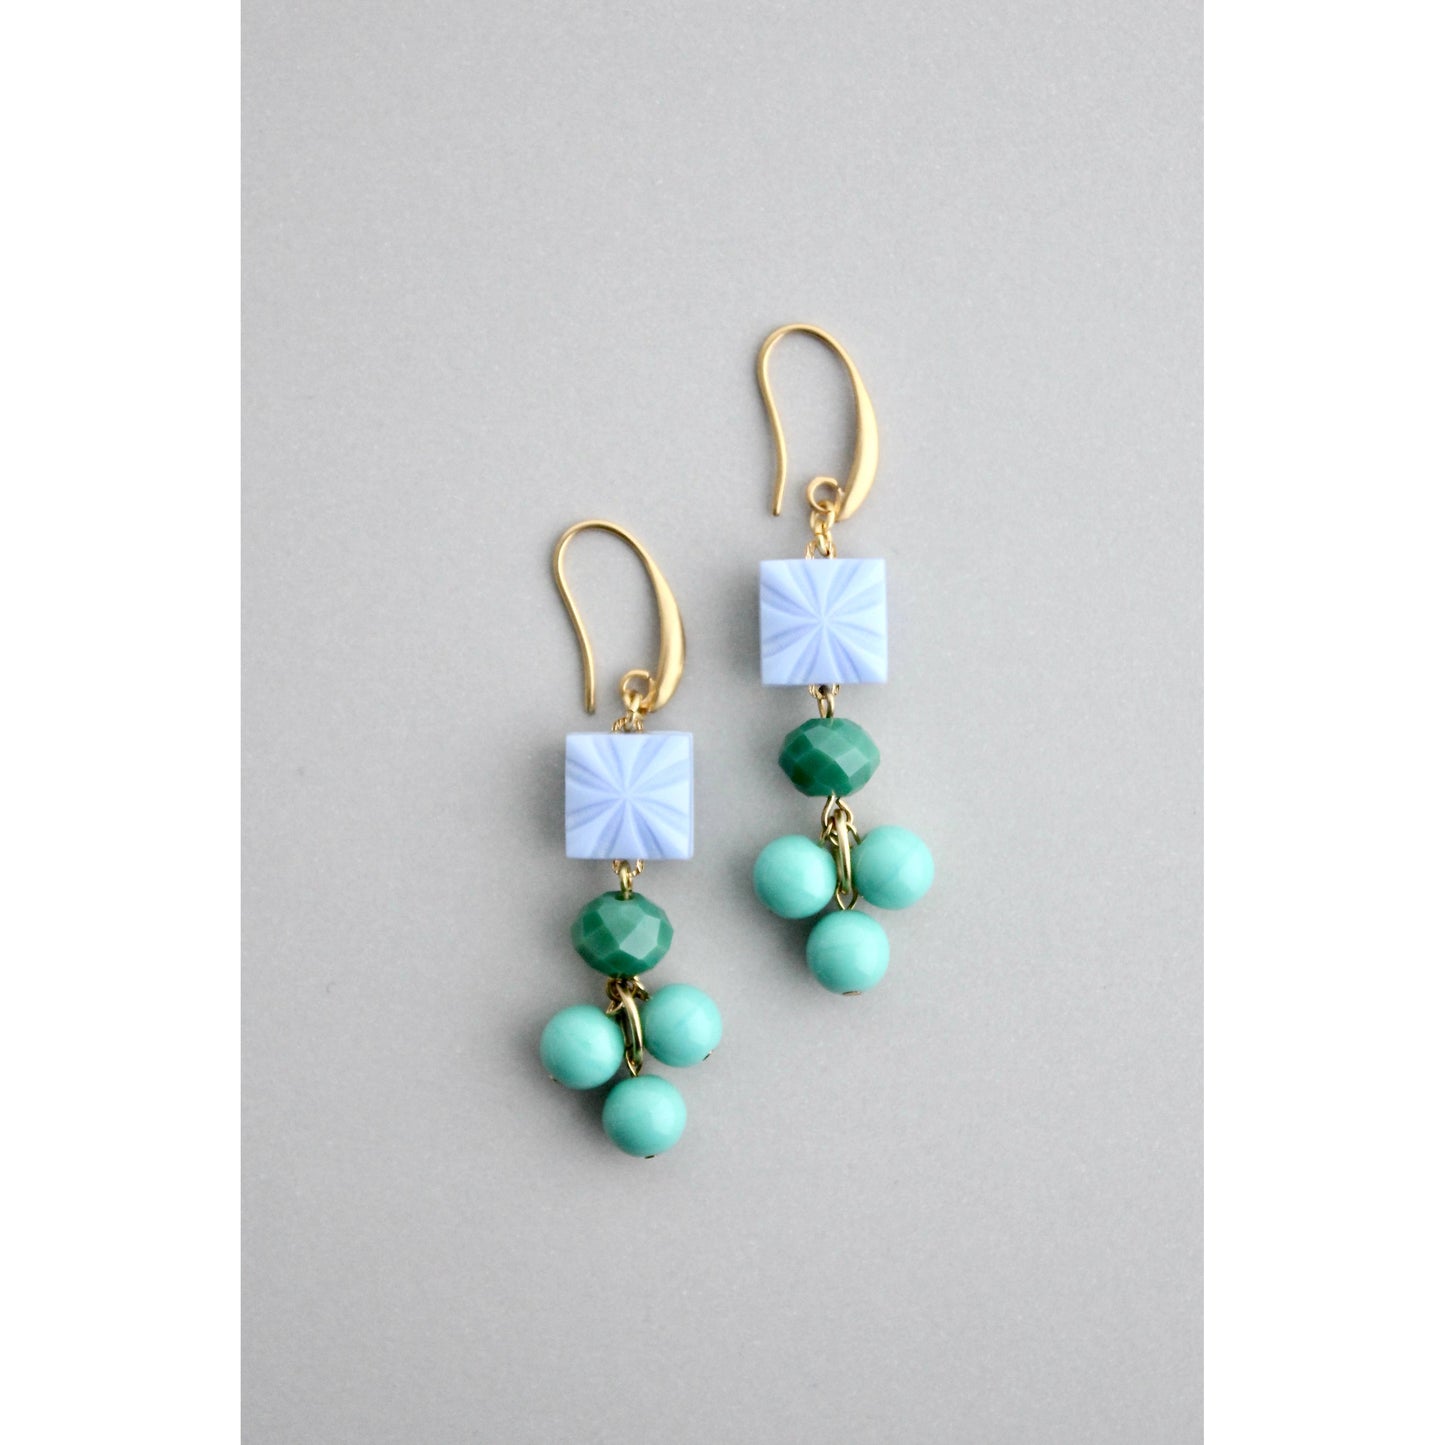 GNDE58  periwinkle, green, and turquoise  earrings